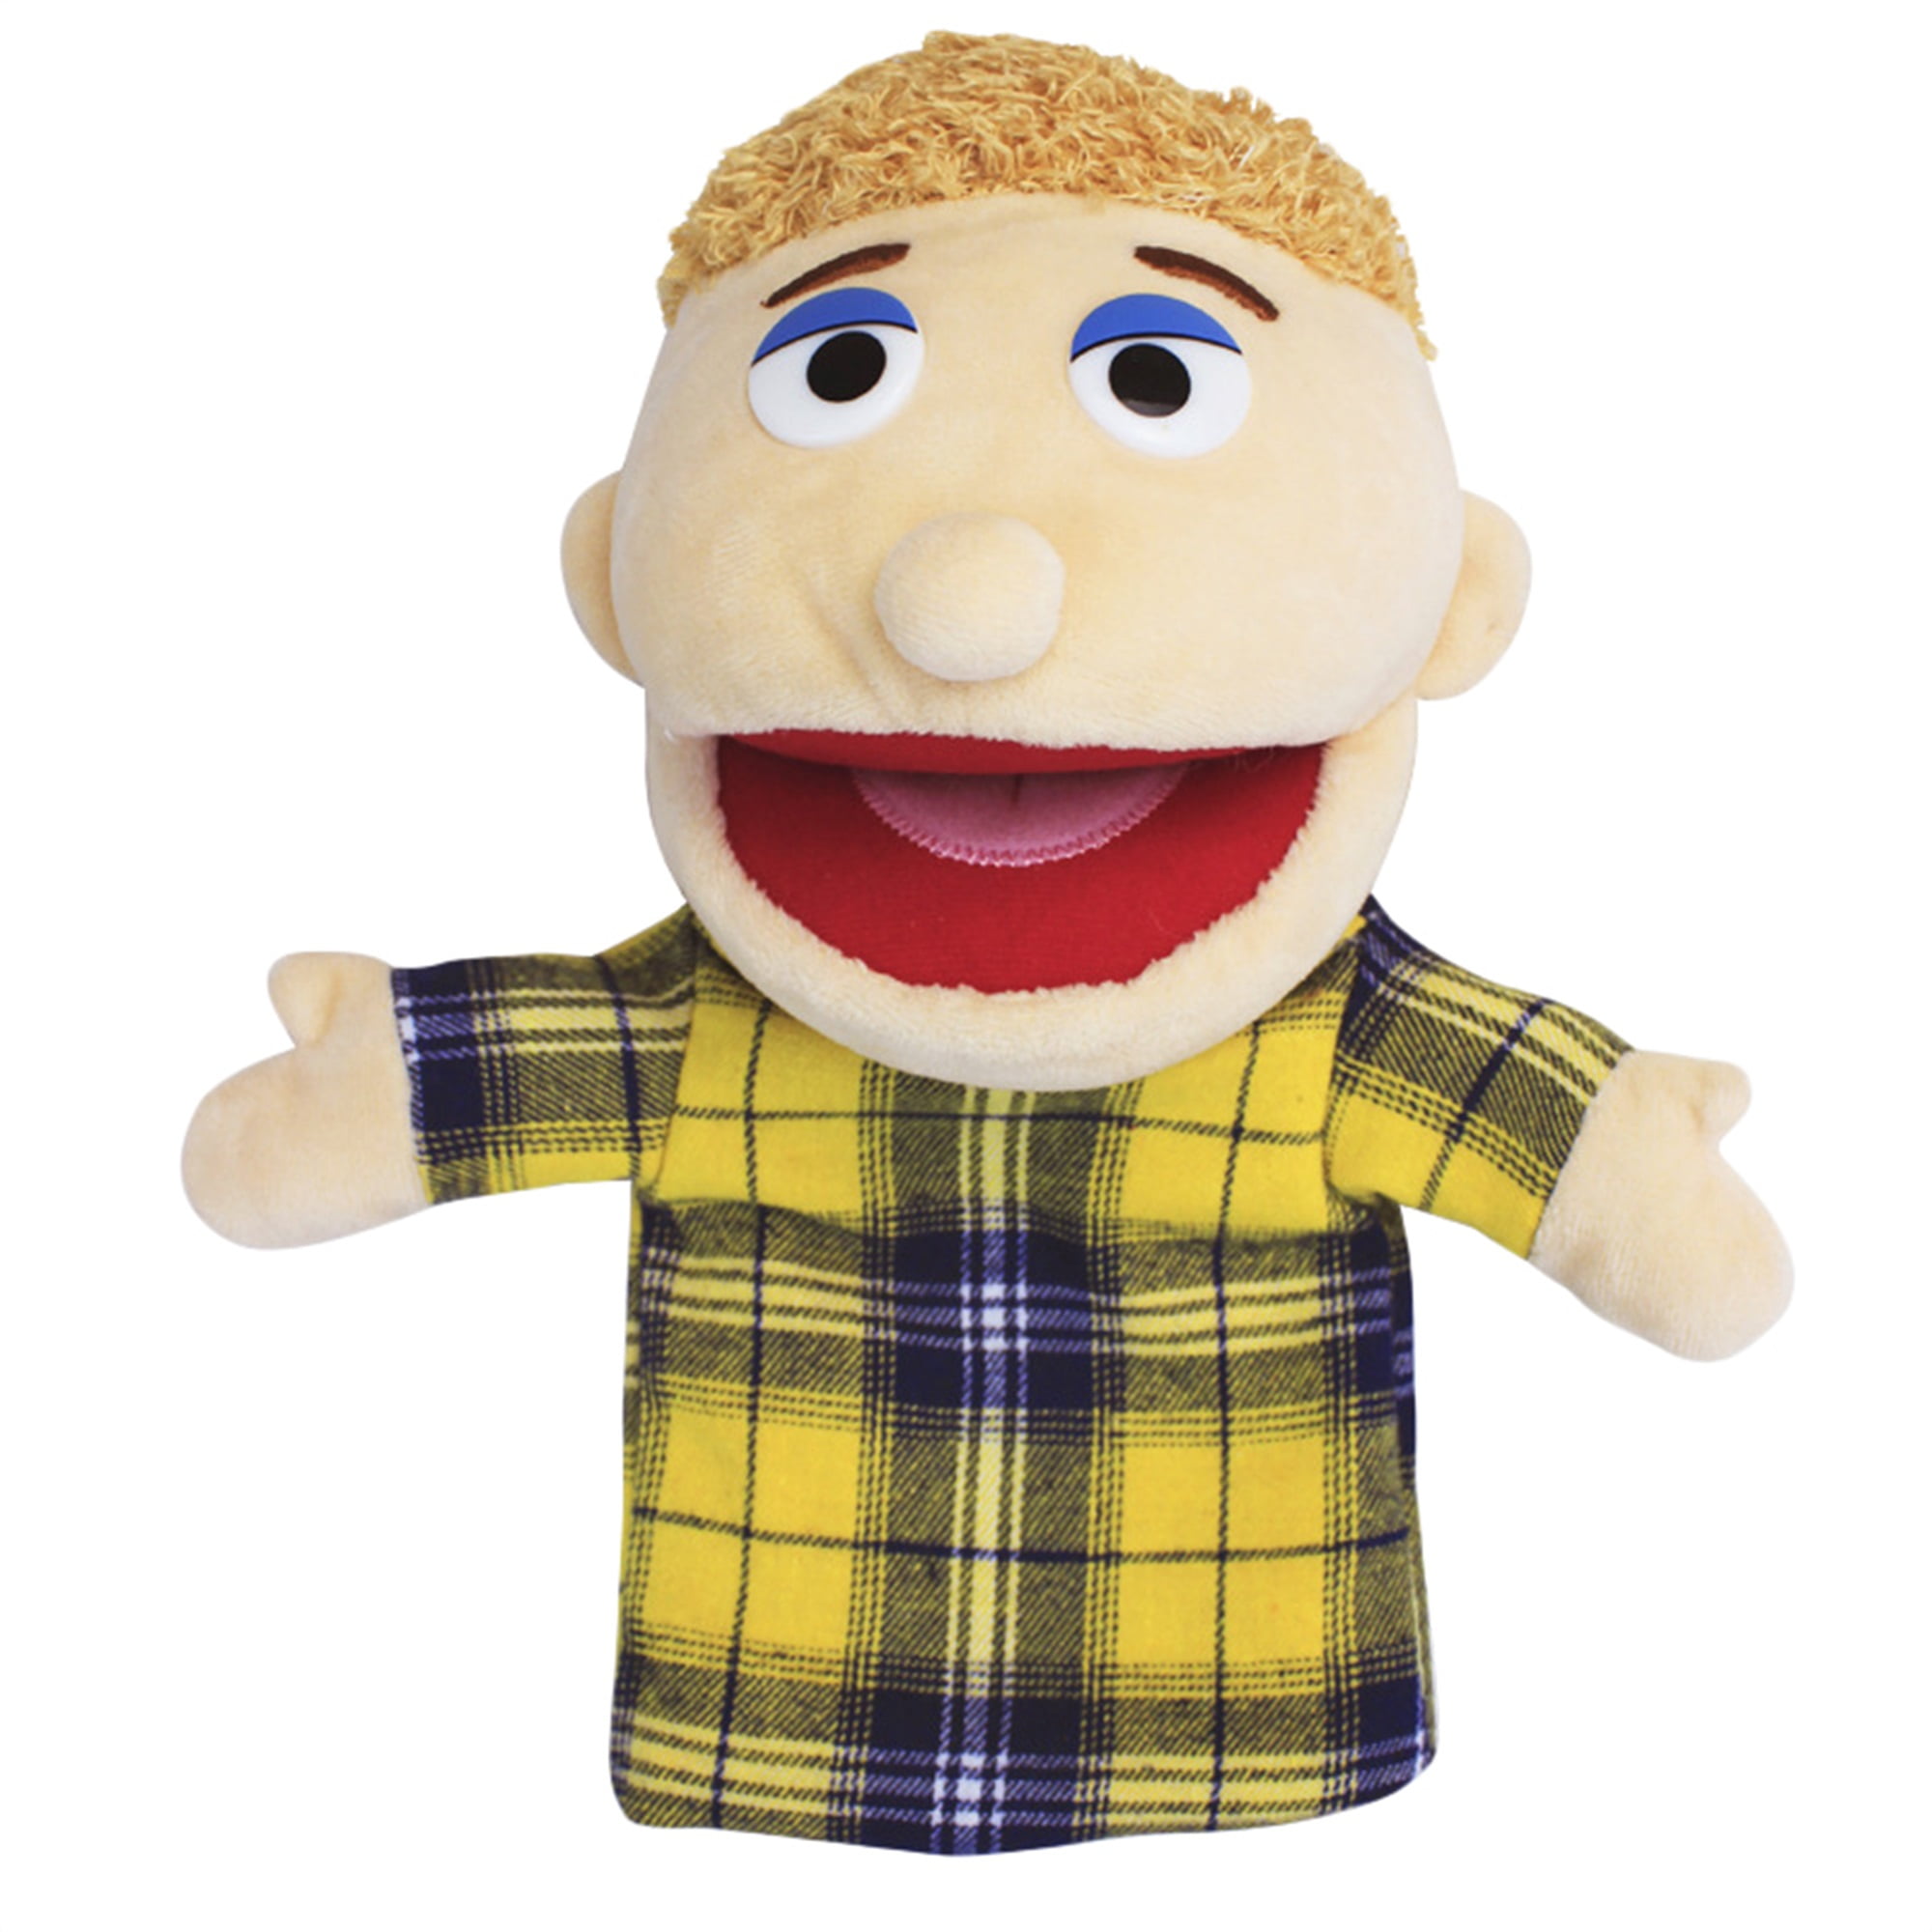  2023 New Jefffrry Puppet Plush Toy, Jefffrry Sister/Mom/Dad  Soft Plush Toy, Hand Puppet for Play House, Mischievous Funny Puppet's Toy  with Working Mouth, Kid's (Father) : Toys & Games